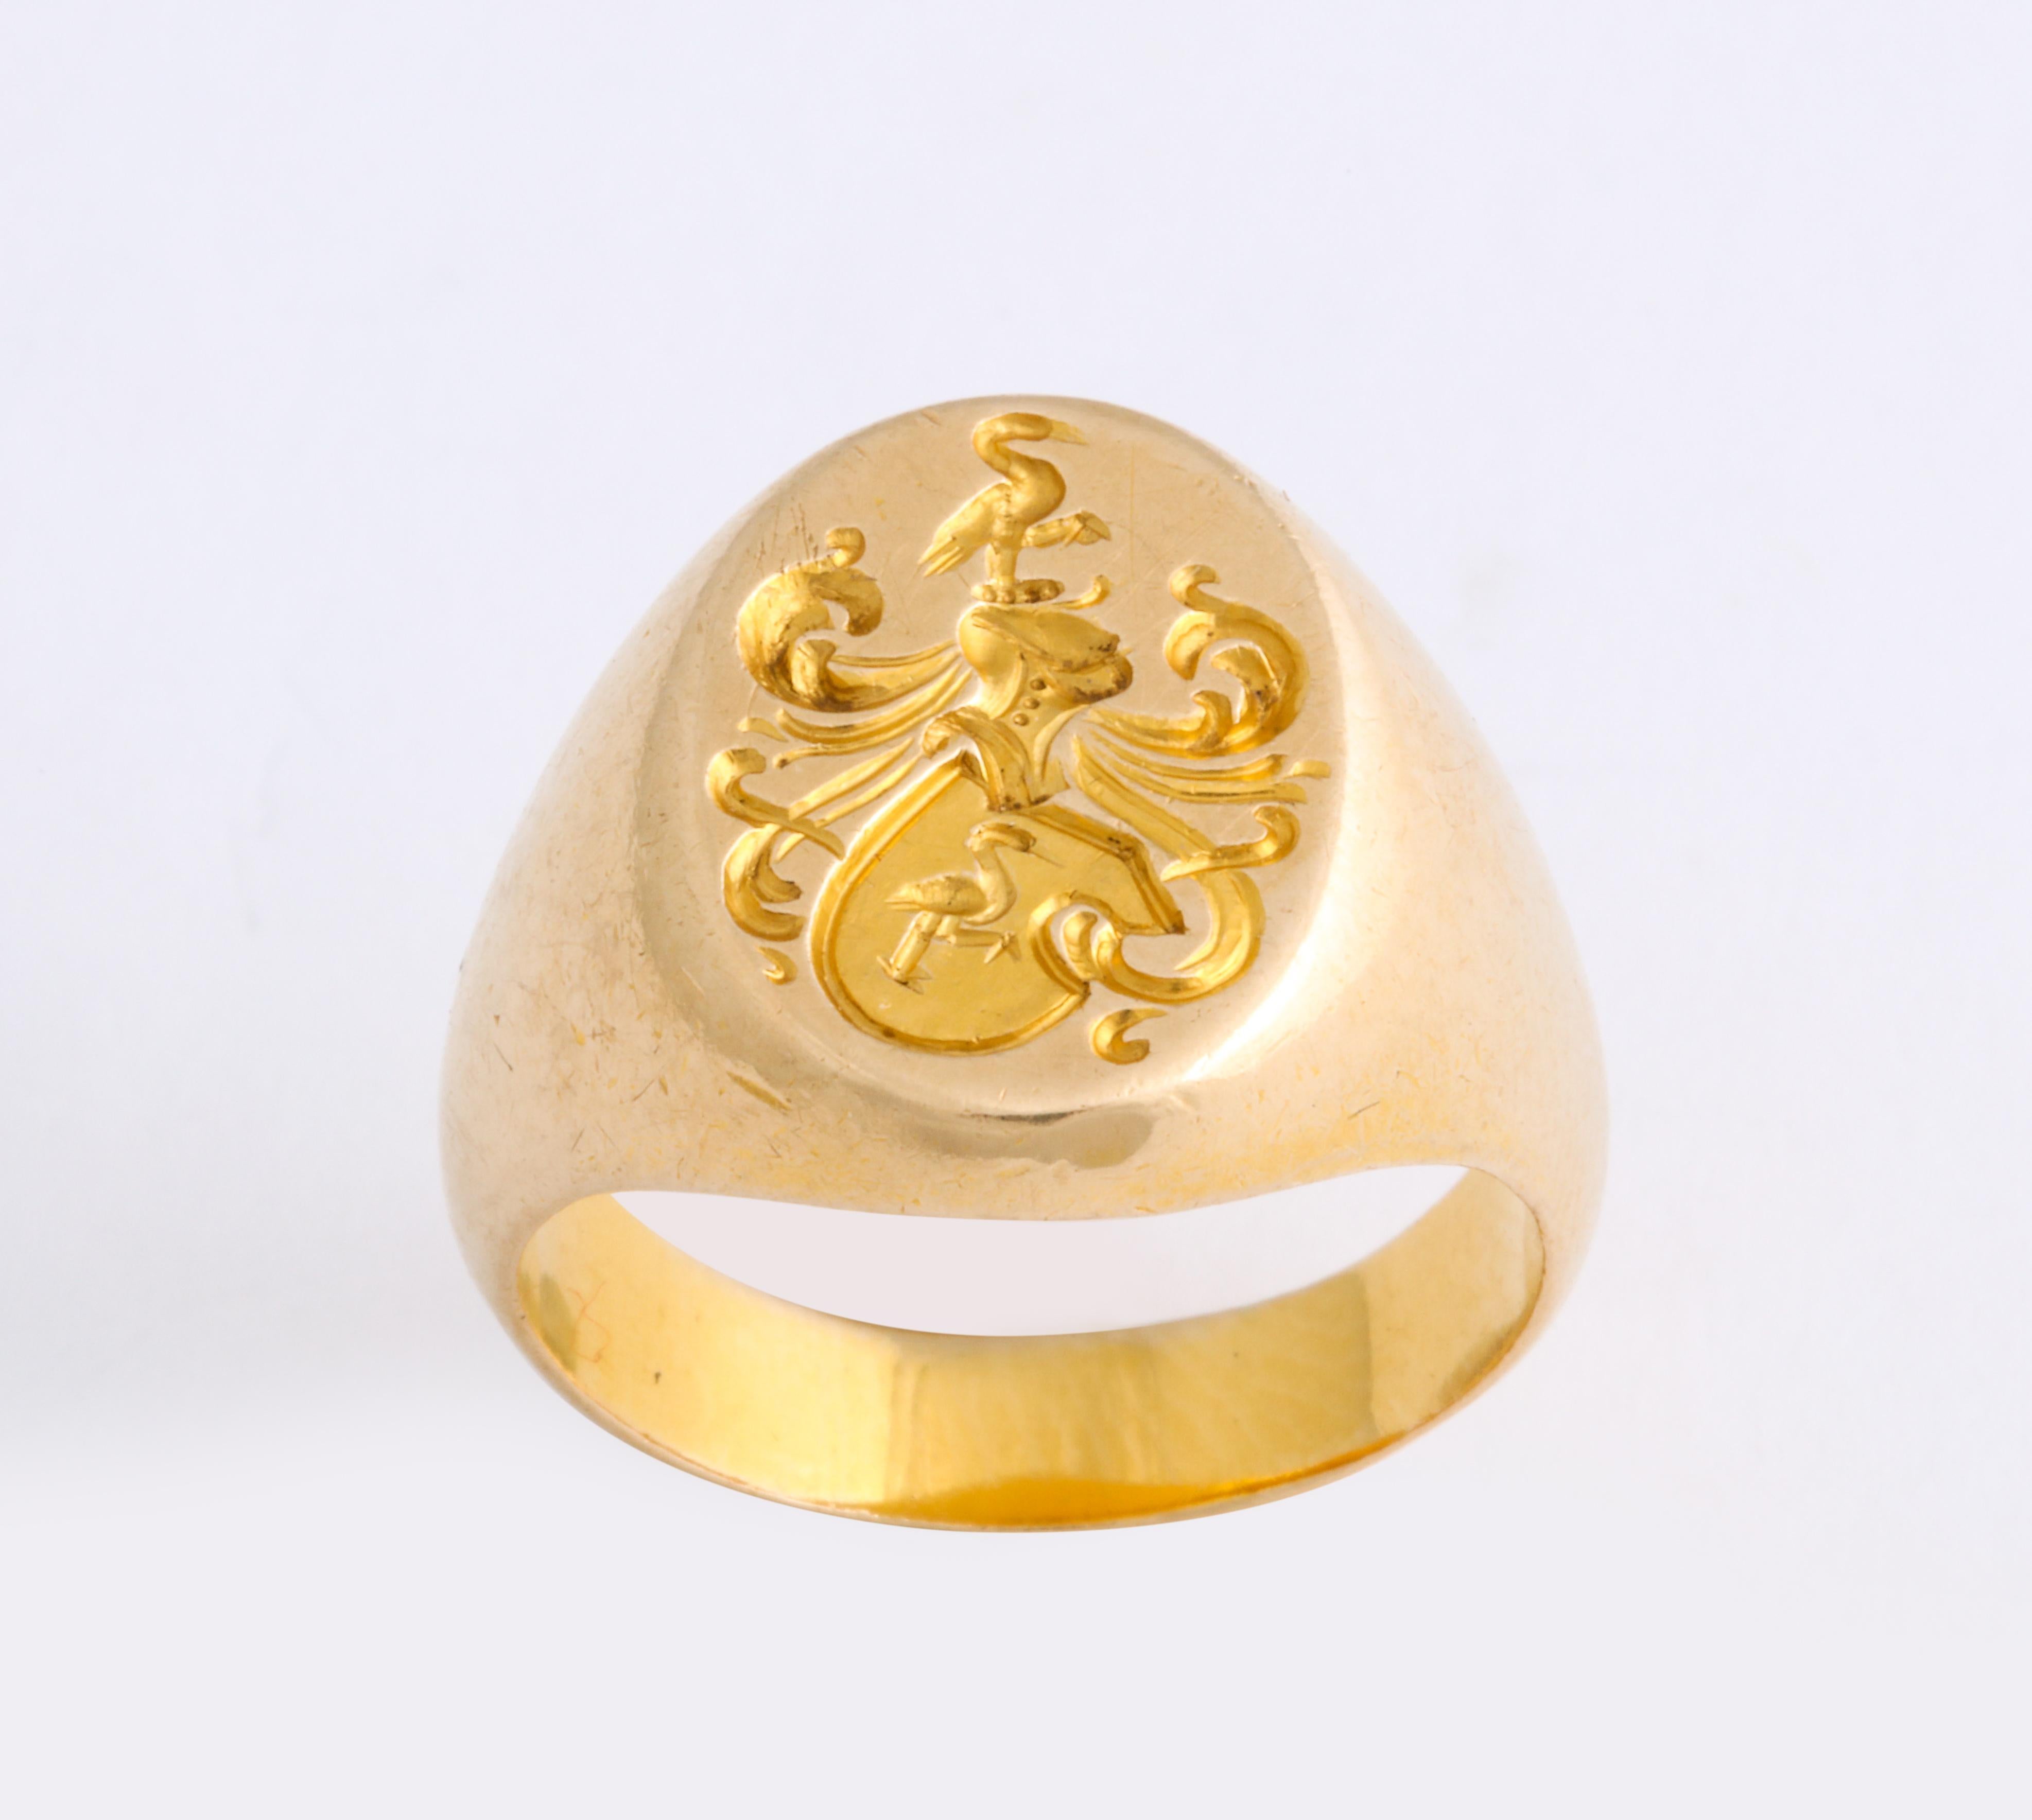 A signet ring in 14 Kt Gold clearly depicts two storks balanced on one leg, one bird within a shield, the other above a plumed knight's helmet. The pleasure of the positive symbolism attached to storks, aside from balance, is wisdom, intelligence,